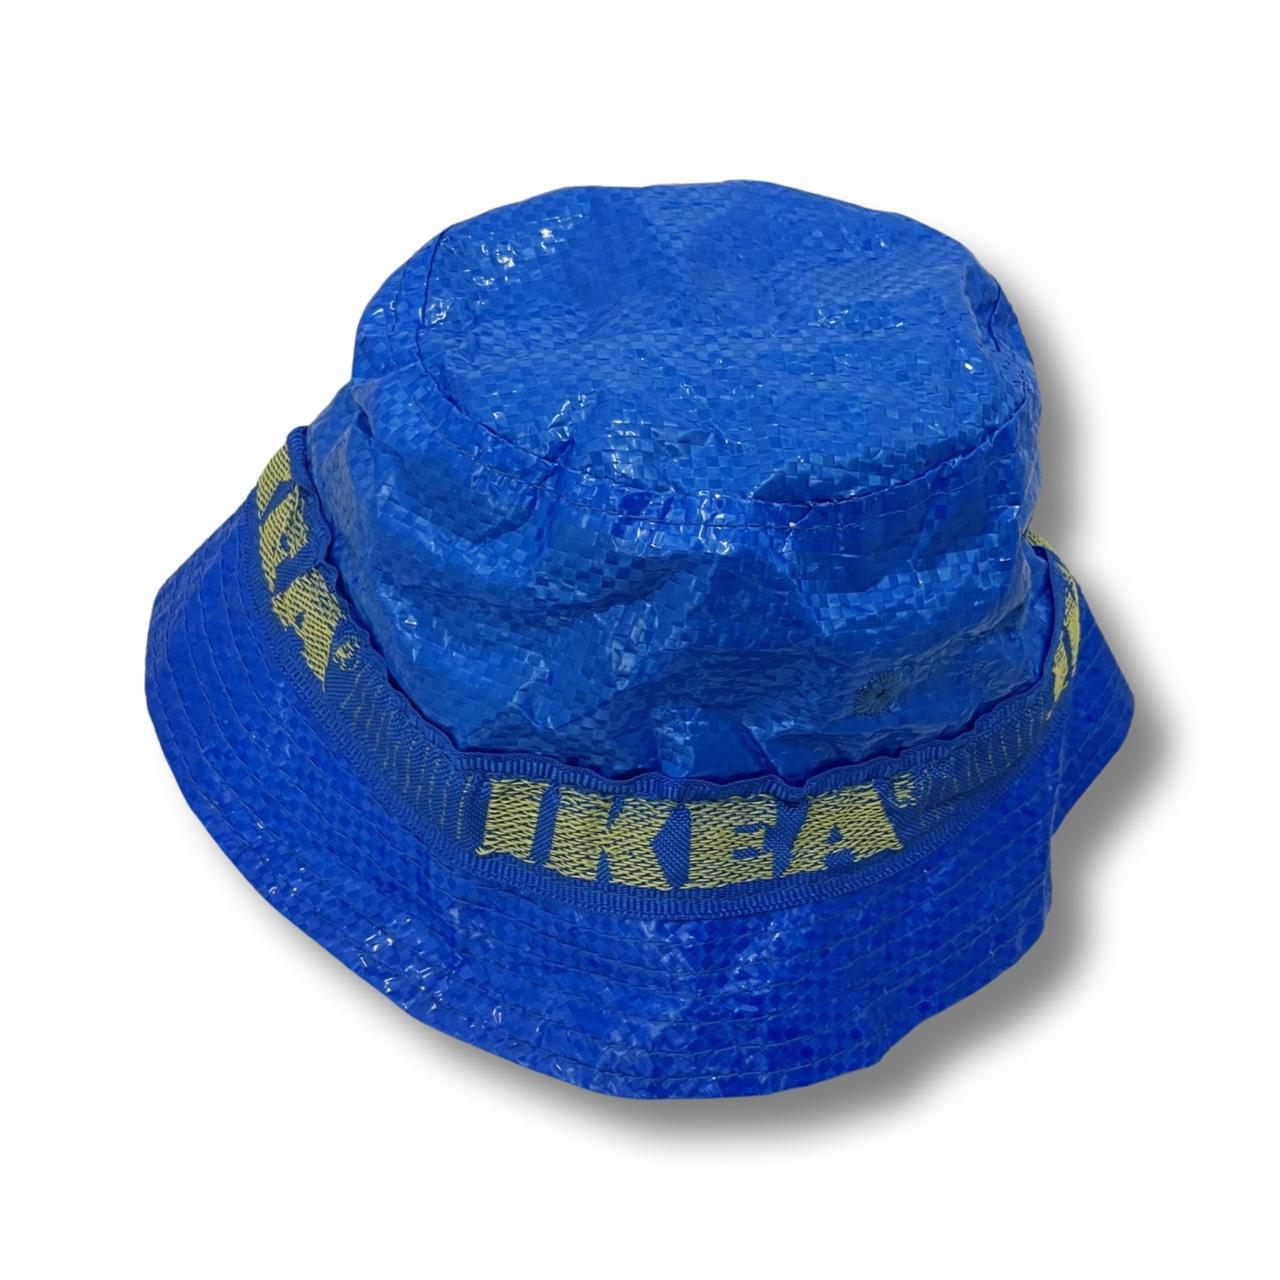 IKEA Women's Yellow and Blue Hat